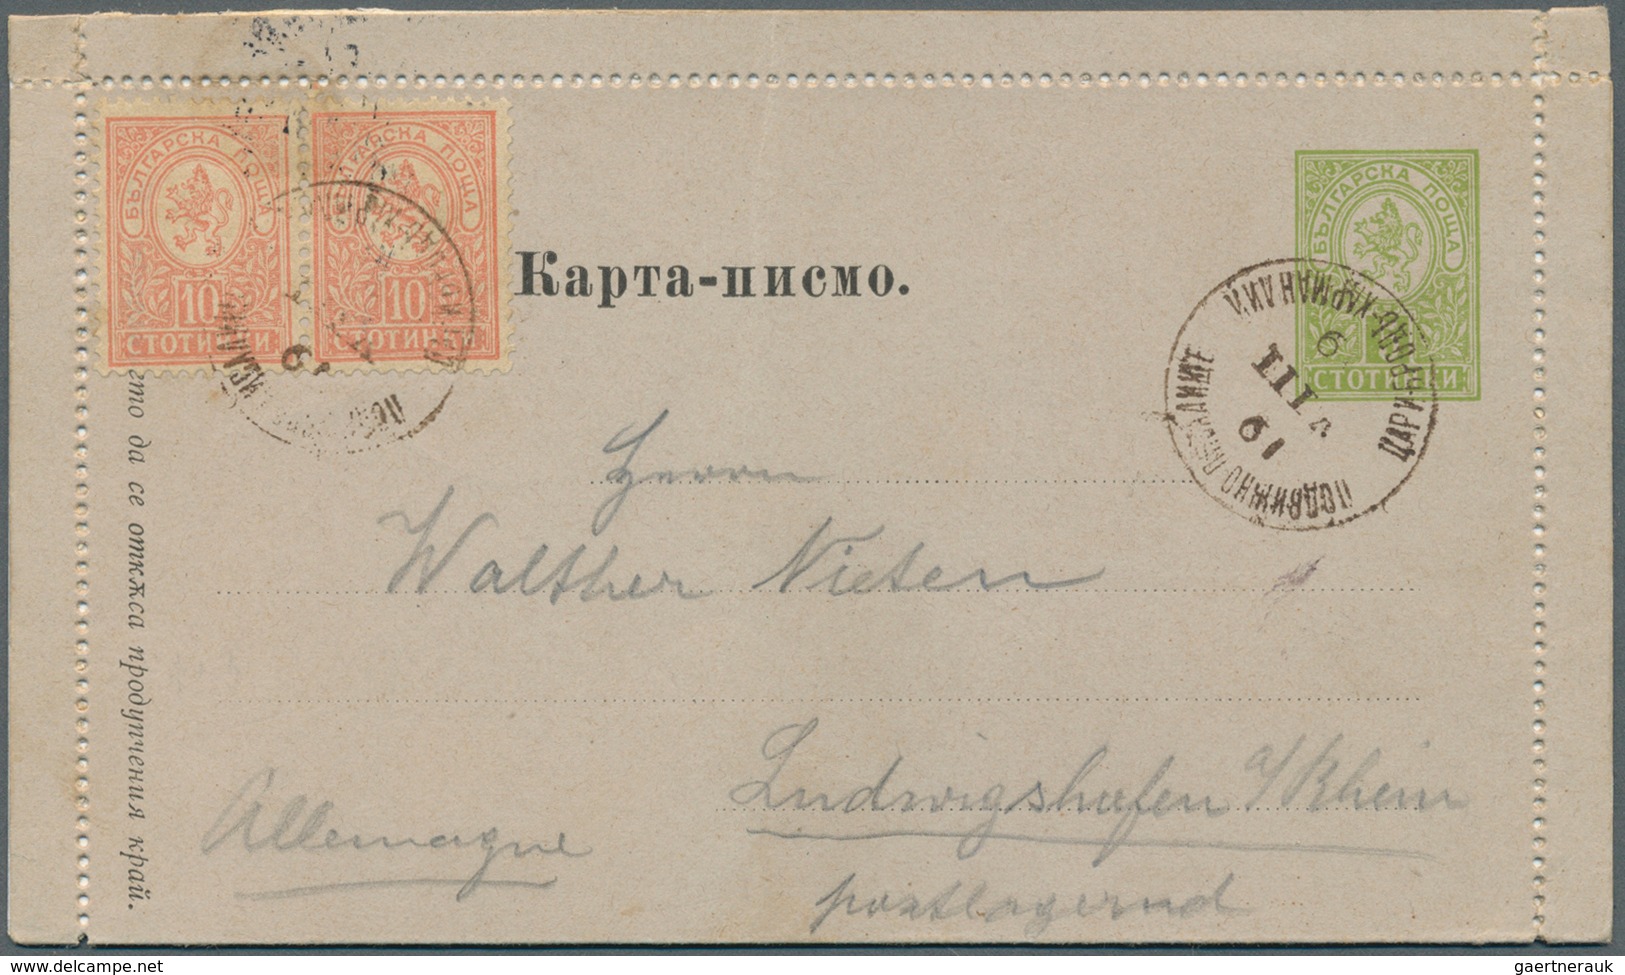 Bulgarien: 1862/1945, collection of 33 entires incl. 1879 1fr. black/red on reverse of cover from So